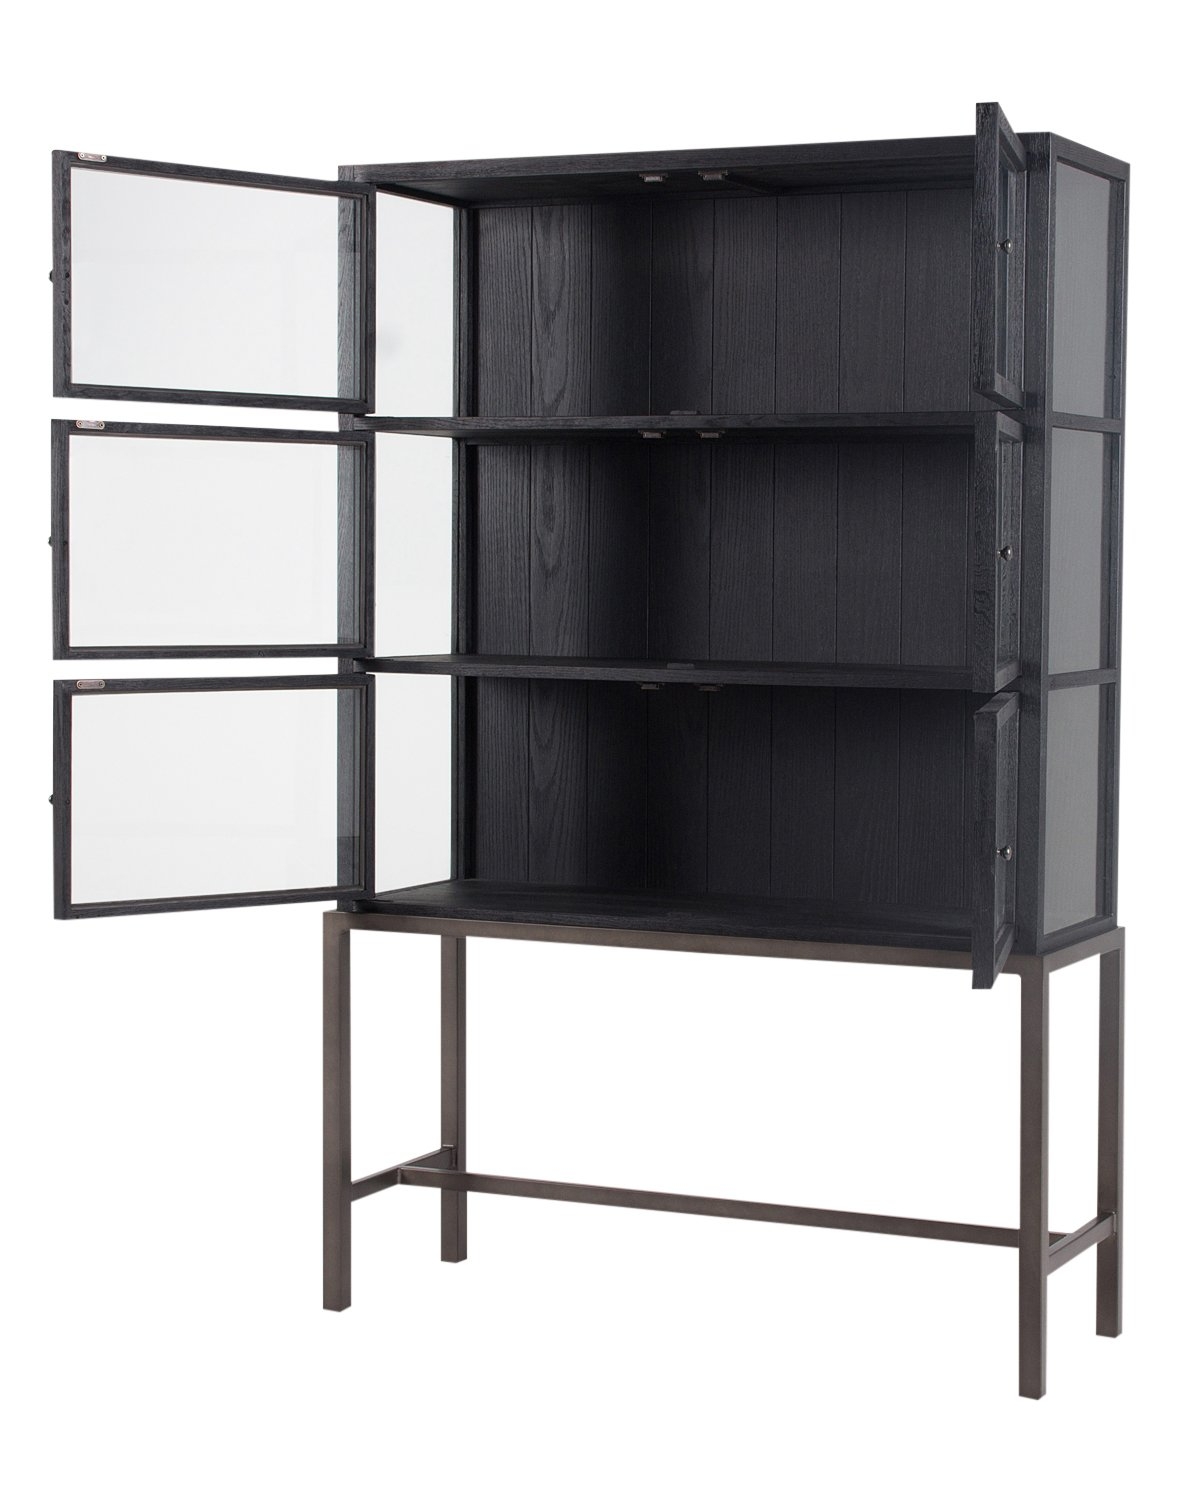 LAWLEY CABINET, DRIFTED BLACK - Image 2